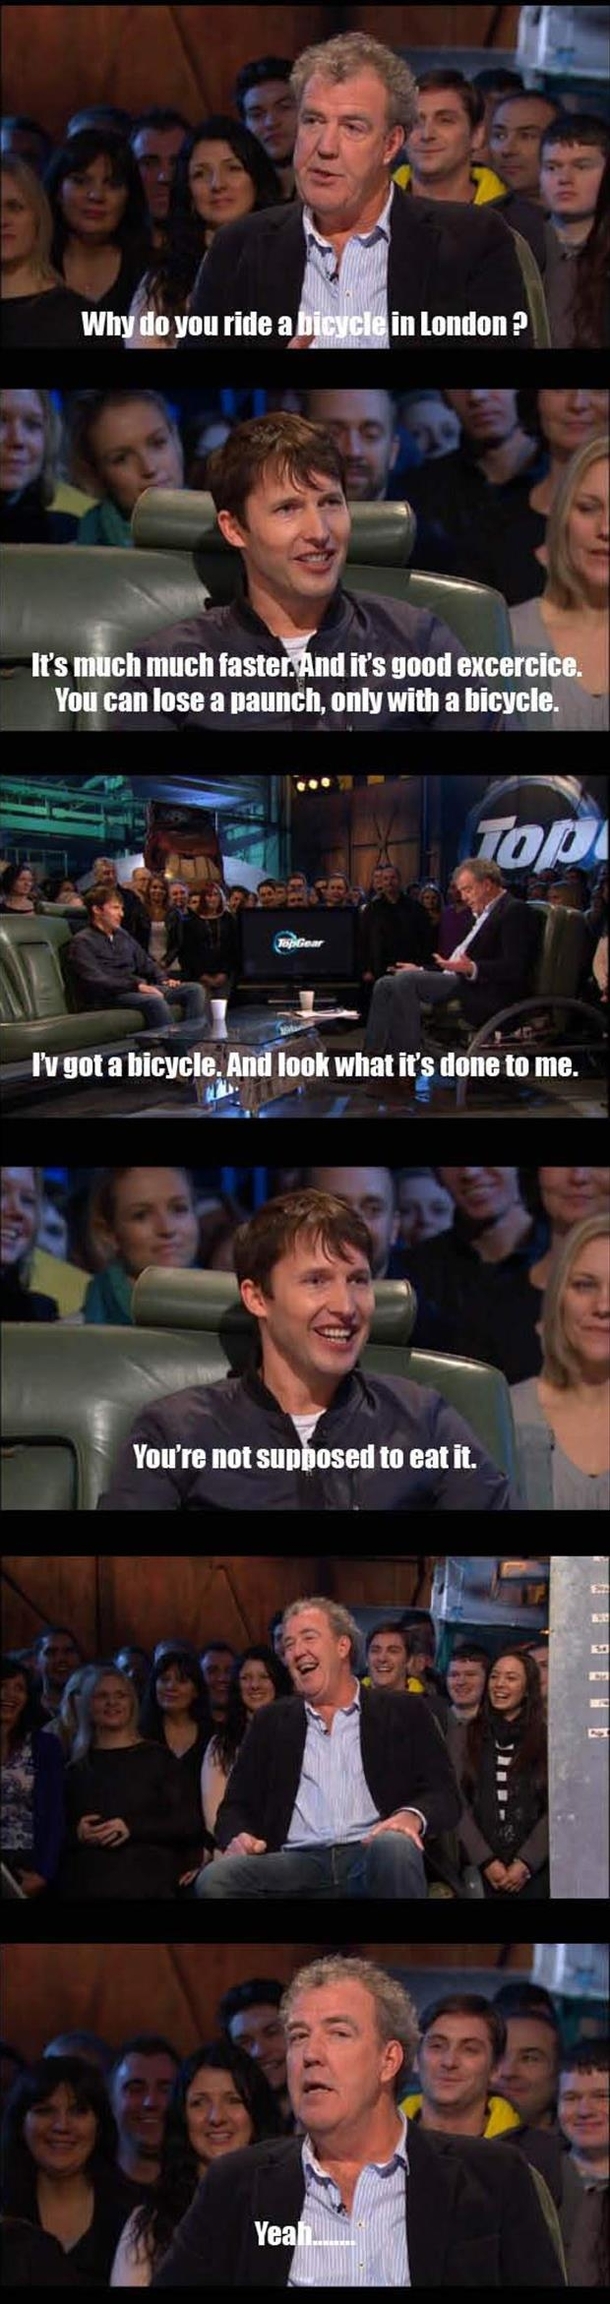 Why do you ride a bicycle in London